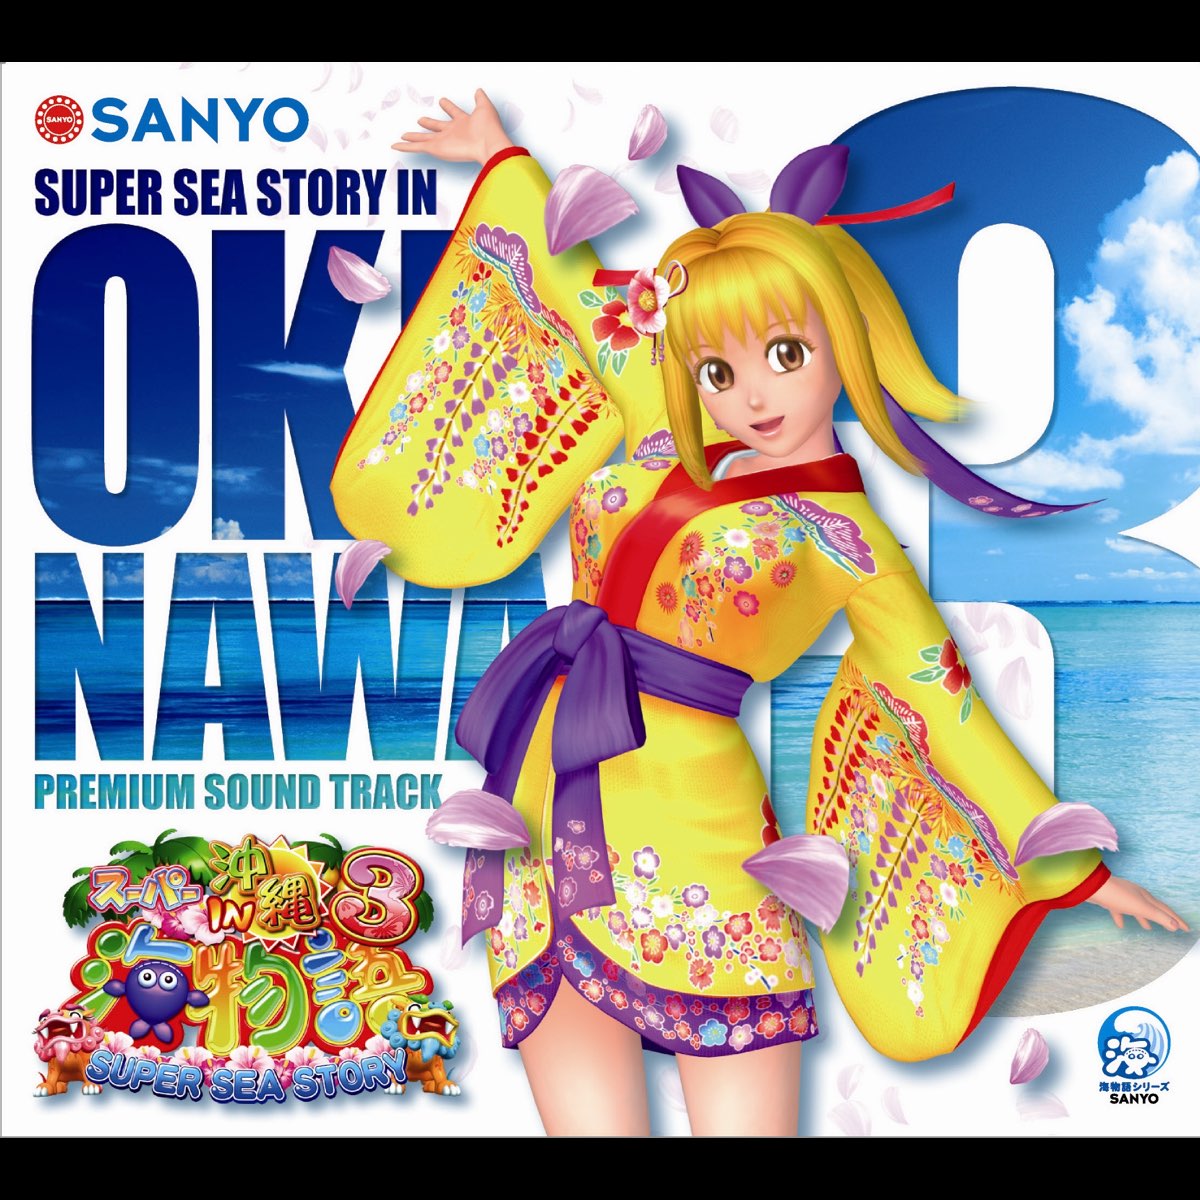 Super Sea Story In Okinawa 3 Ep By Various Artists On Apple Music